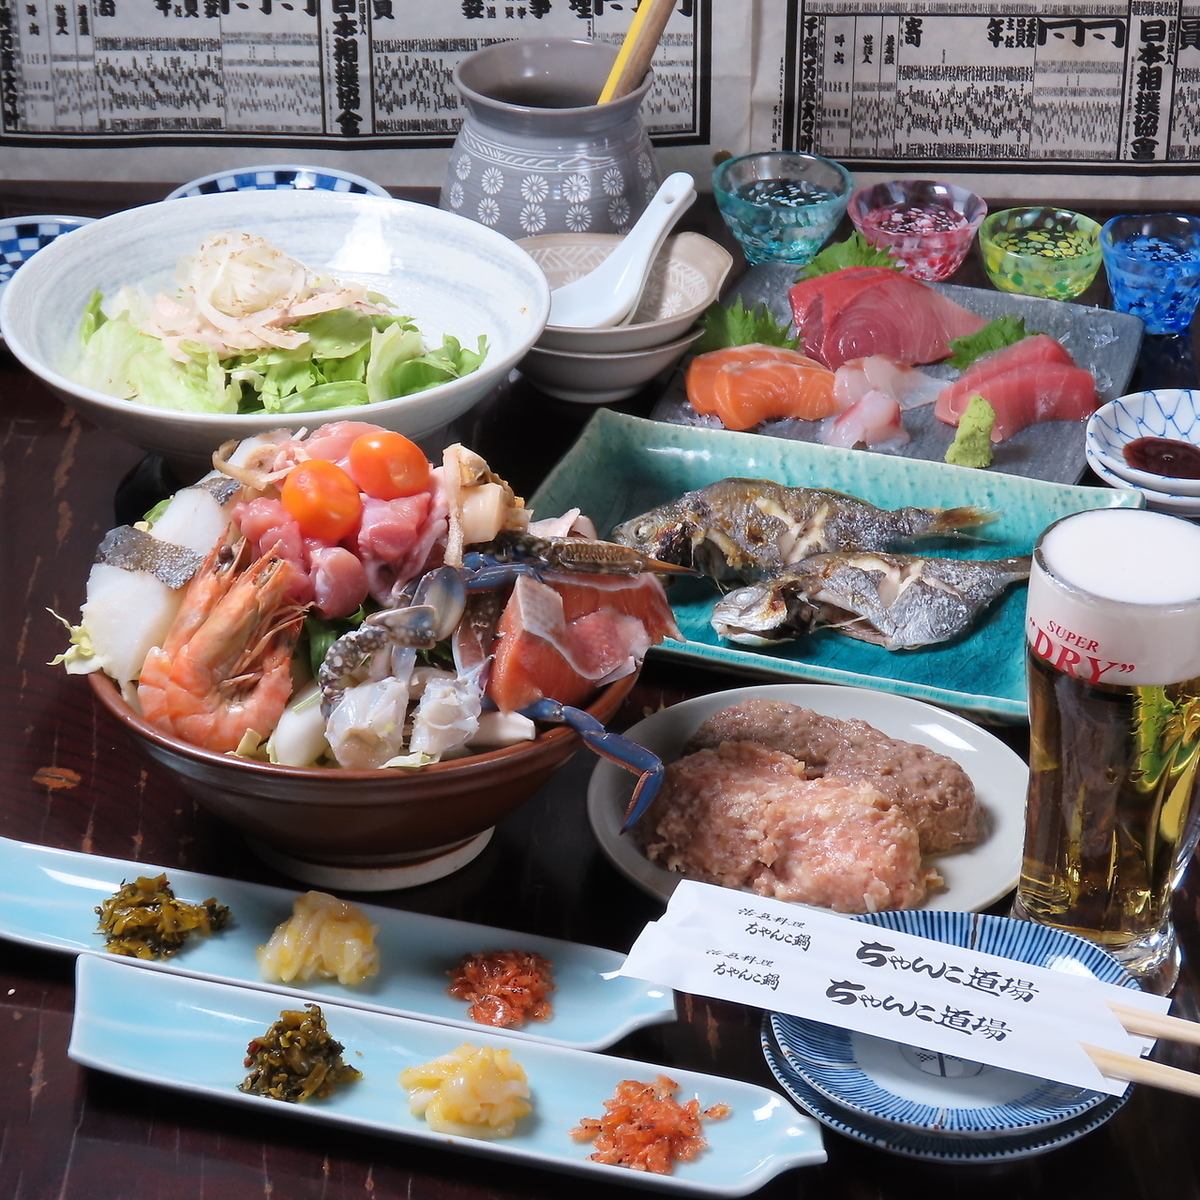 You can enjoy our specially made chanko nabe at a great price!